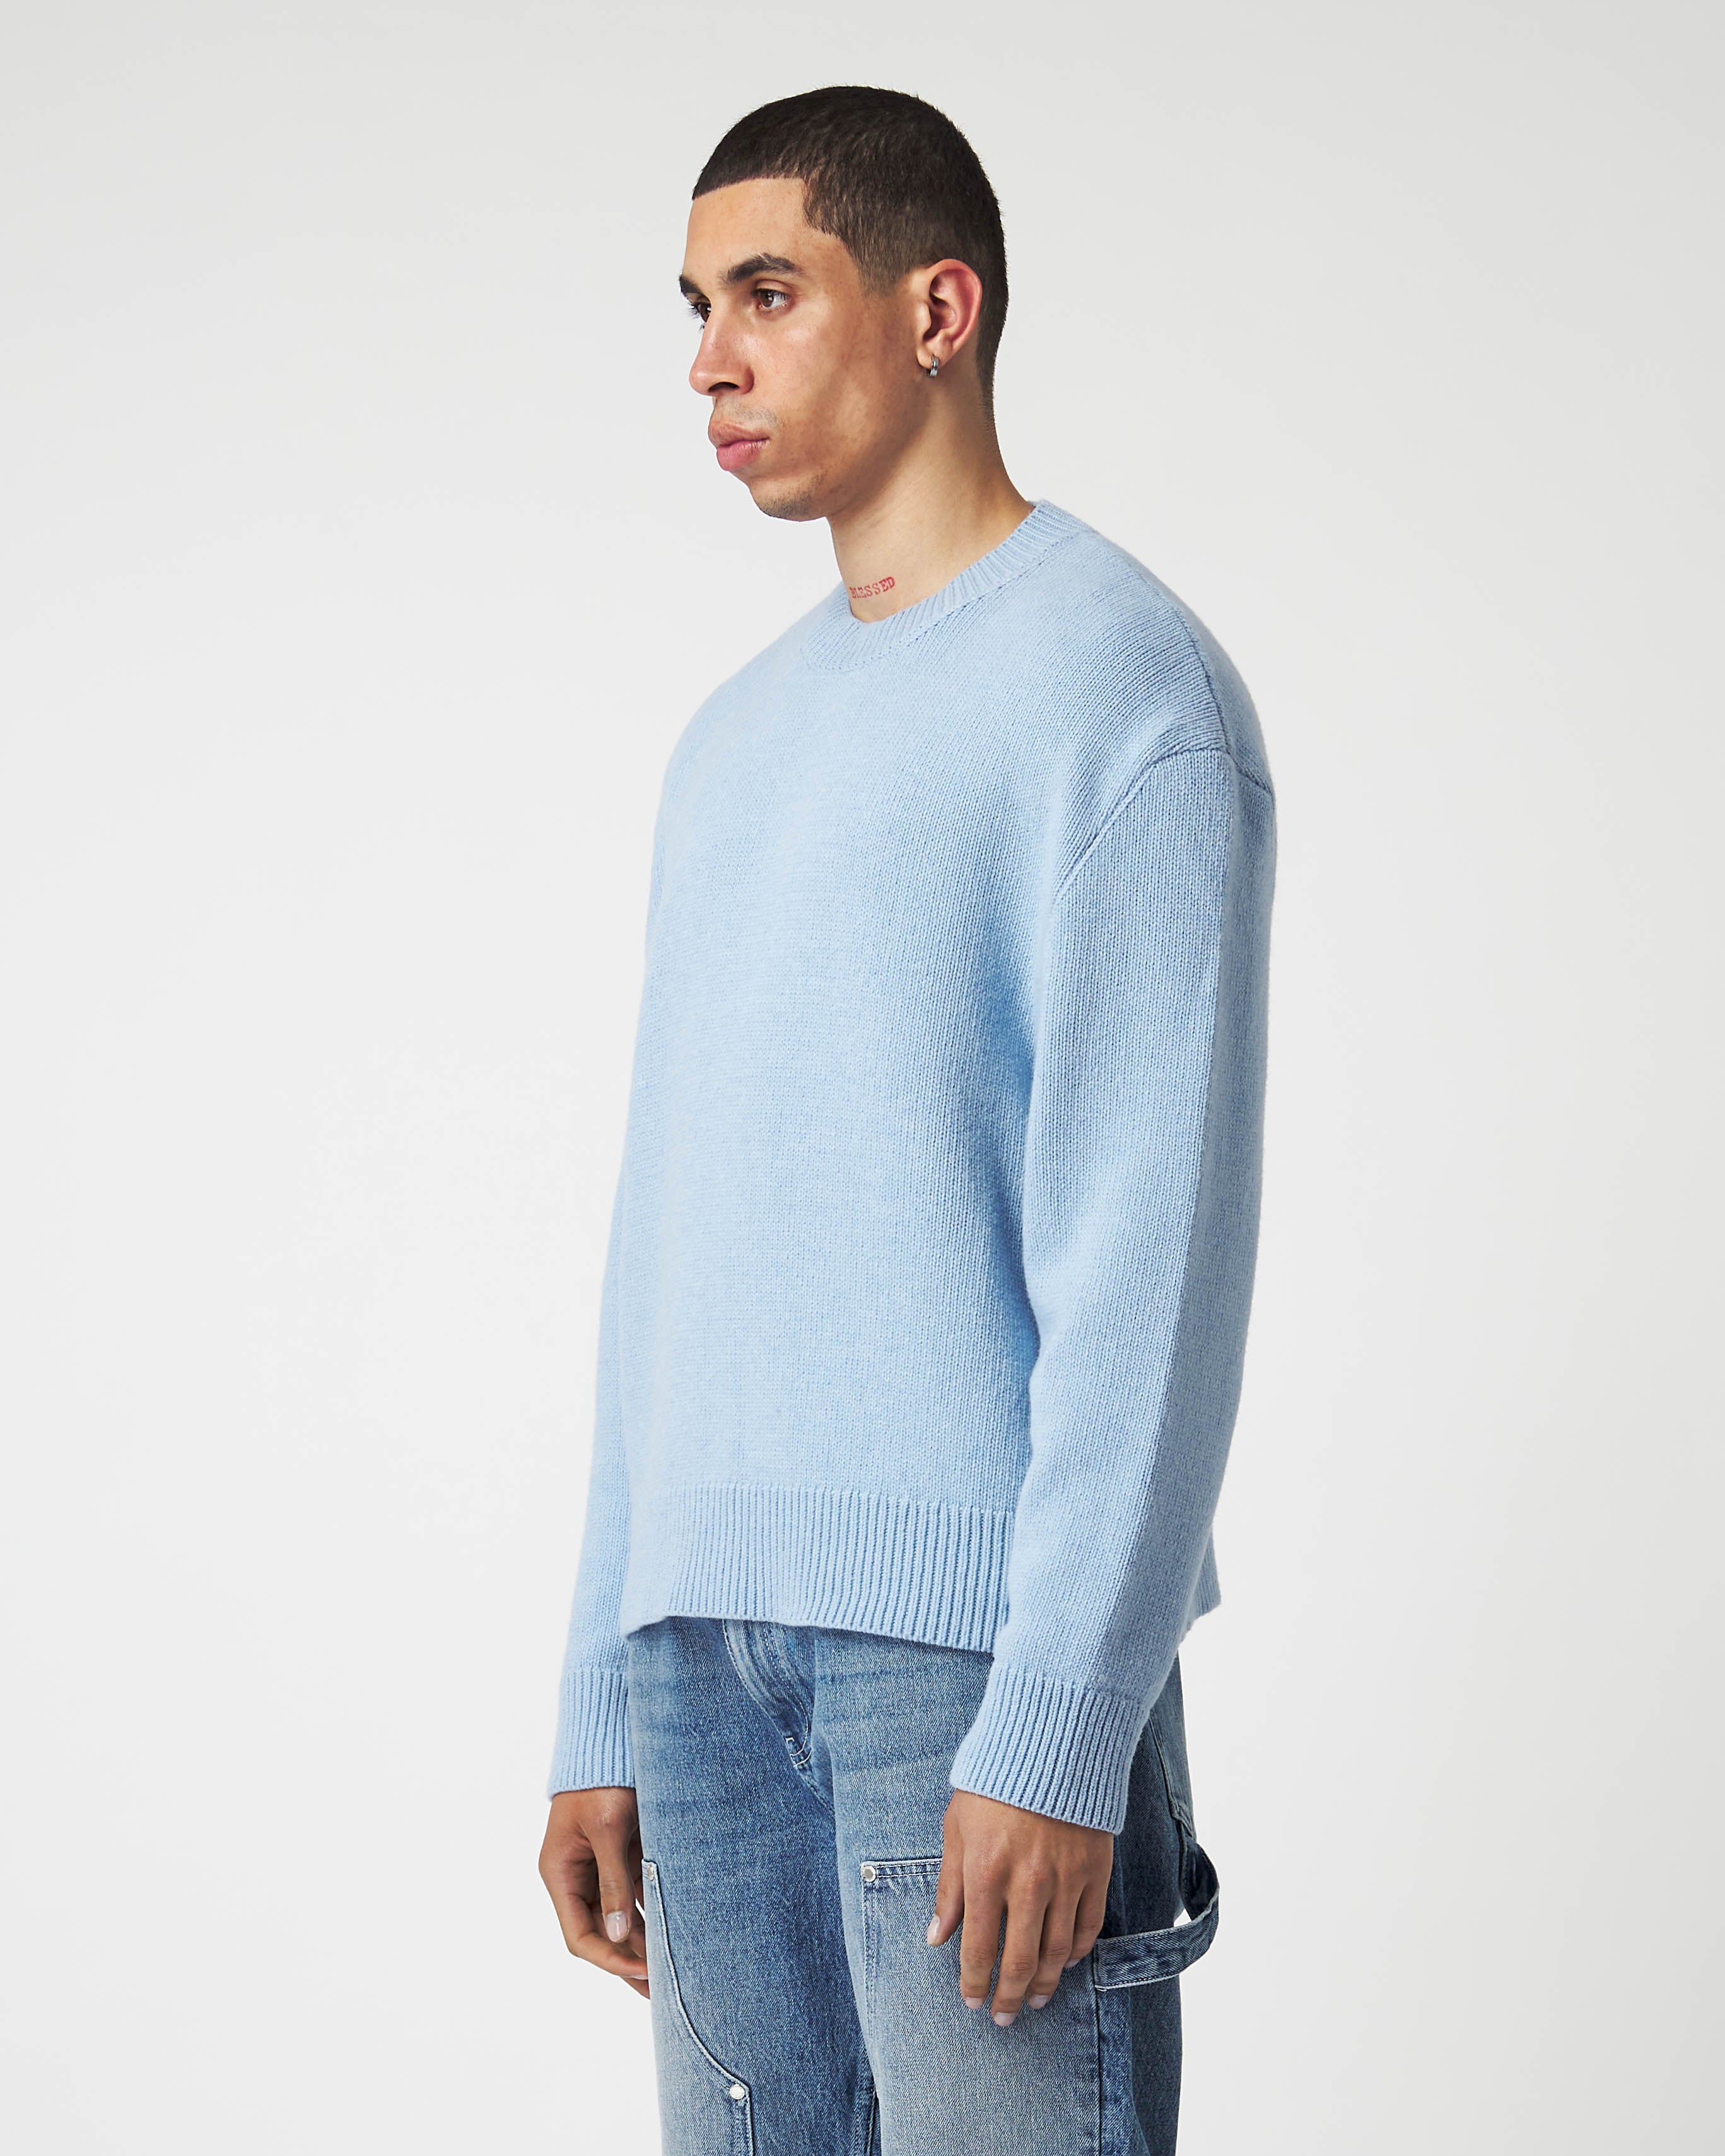 Baby blue knit sweater